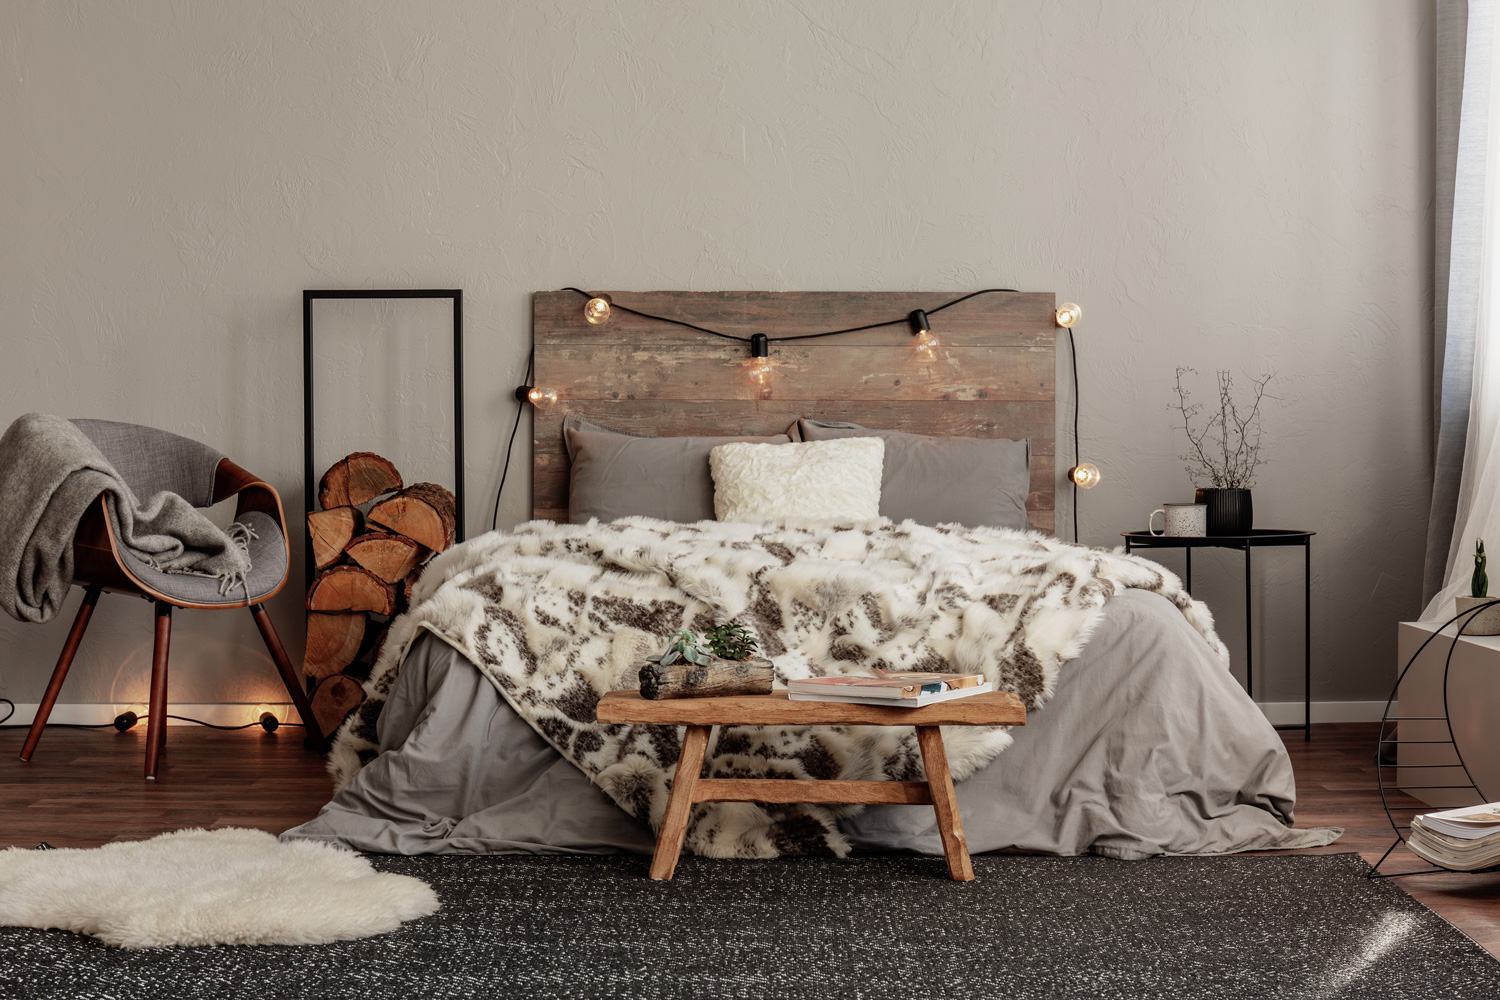 Trendy grey chair with blanket and log of wood next to cozy double bed with wooden headboard and light bulbs